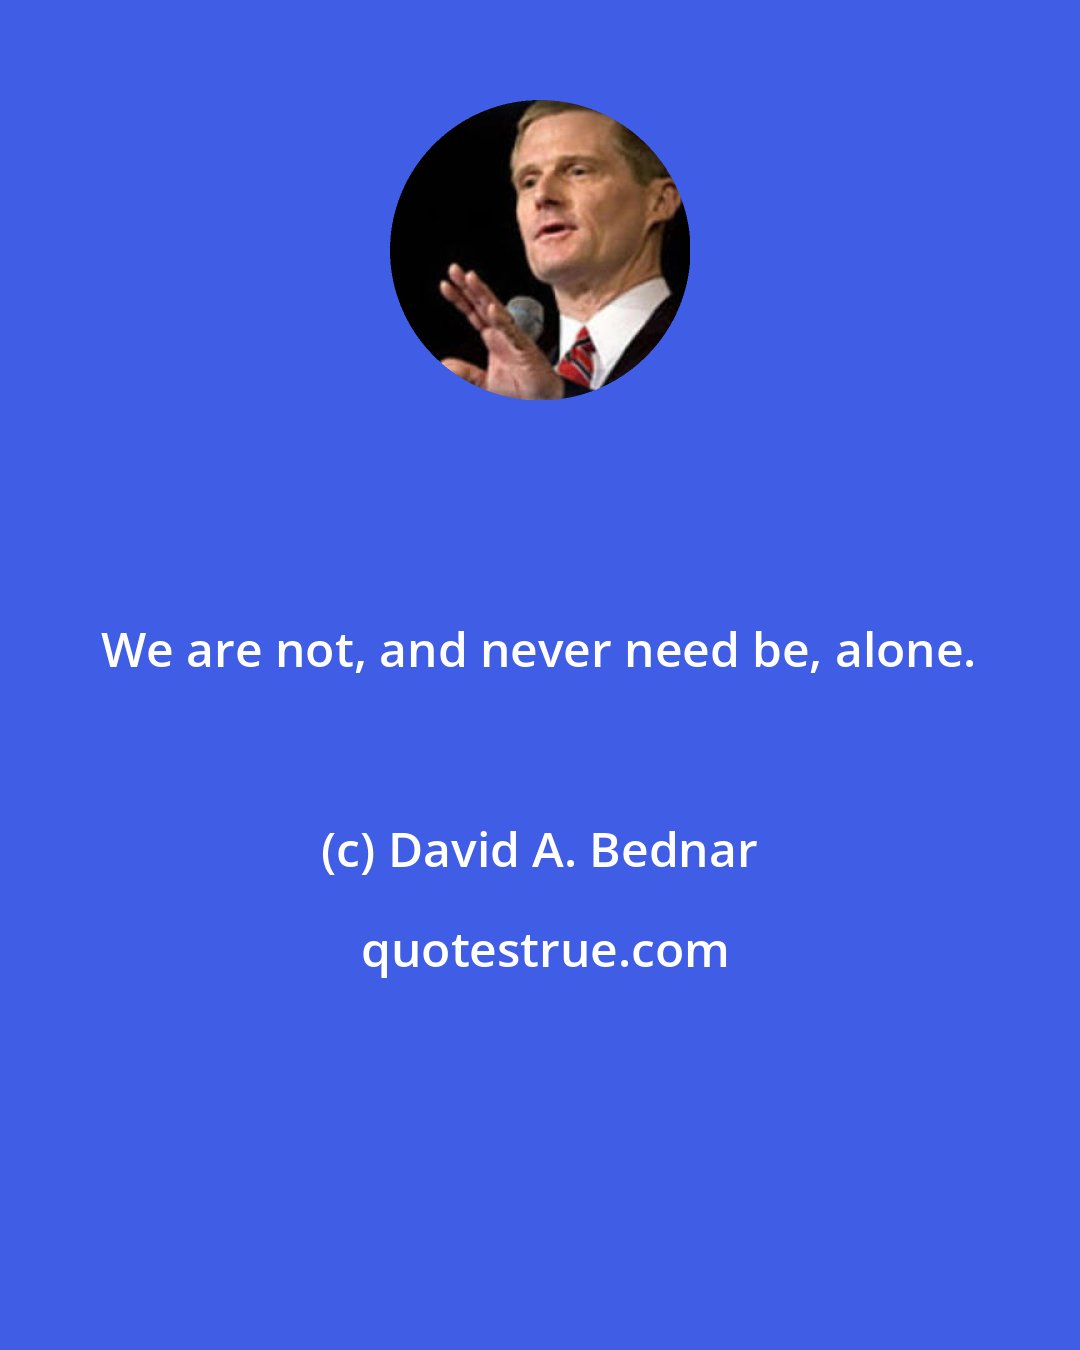 David A. Bednar: We are not, and never need be, alone.